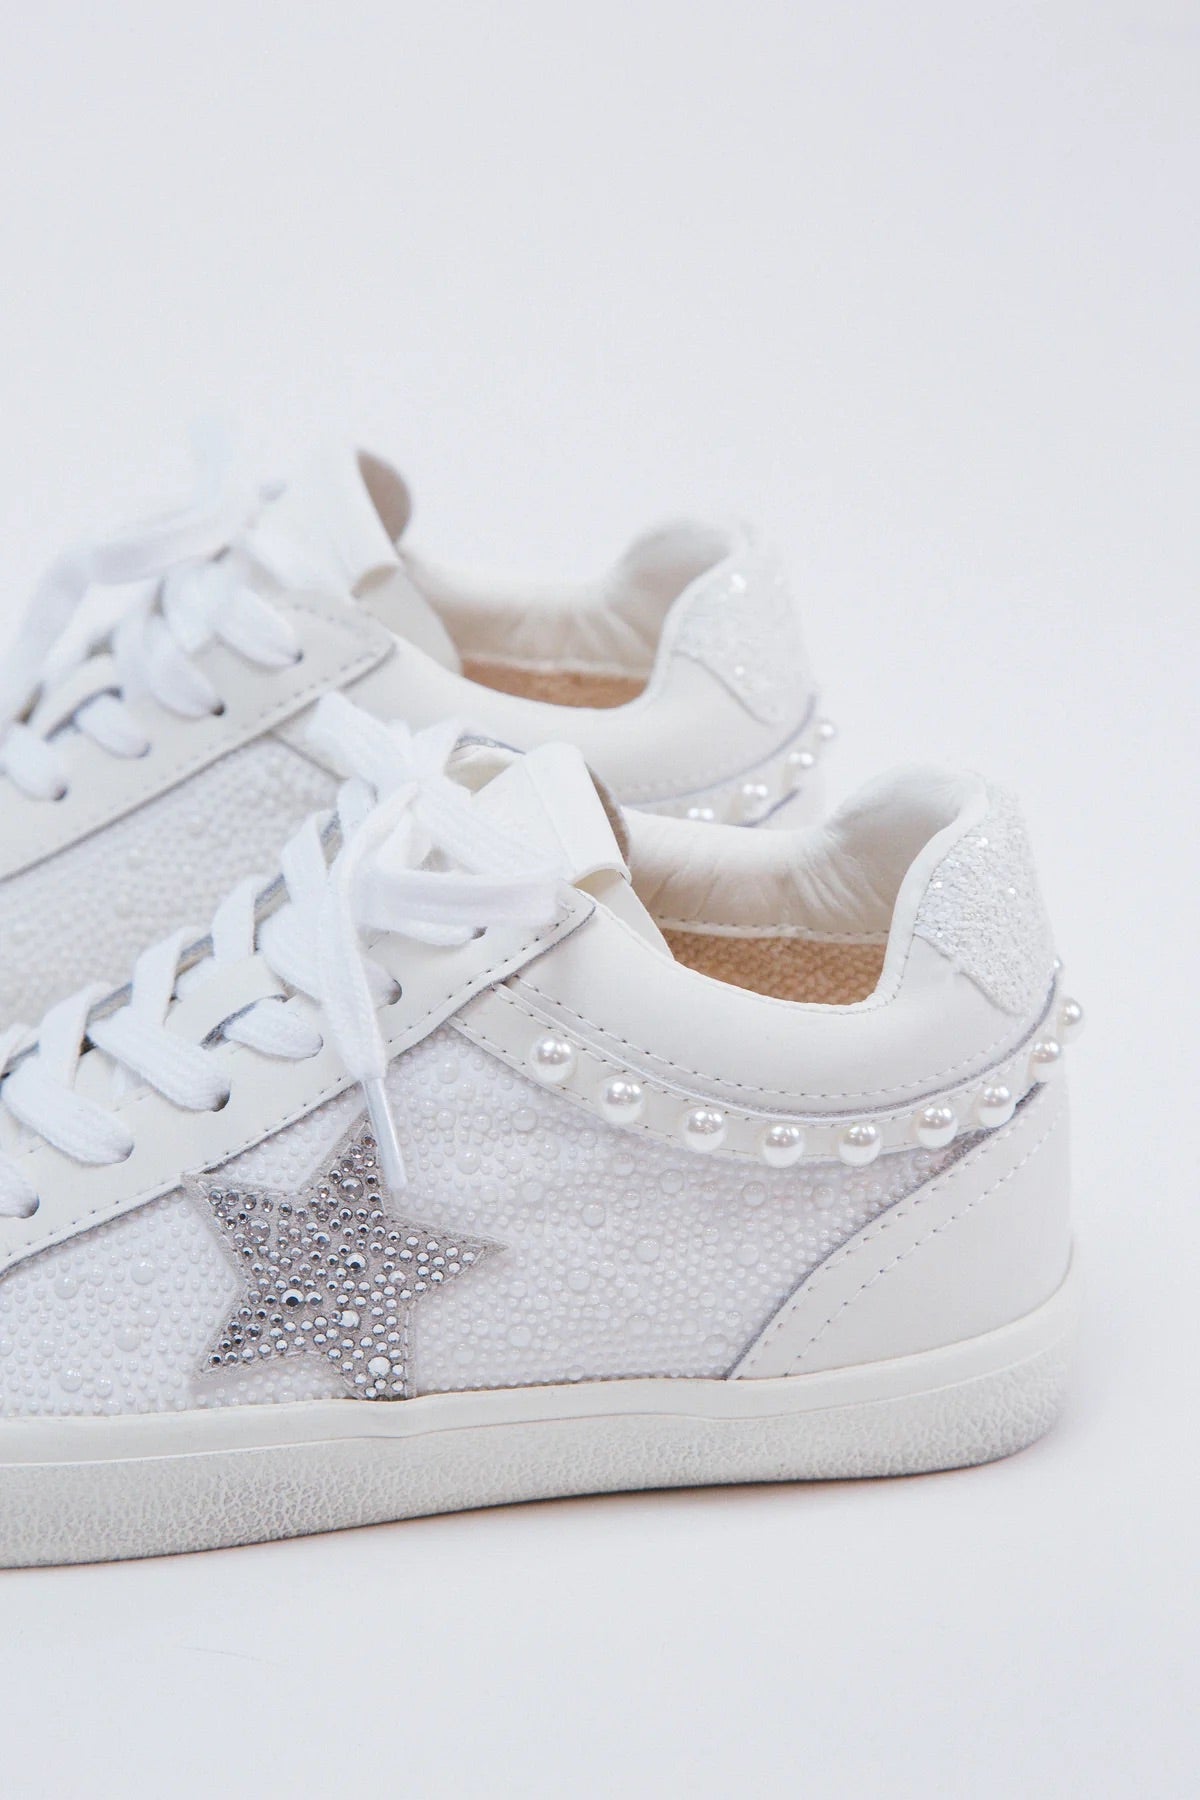 Perscila White Pearl Mid Top Sneakers